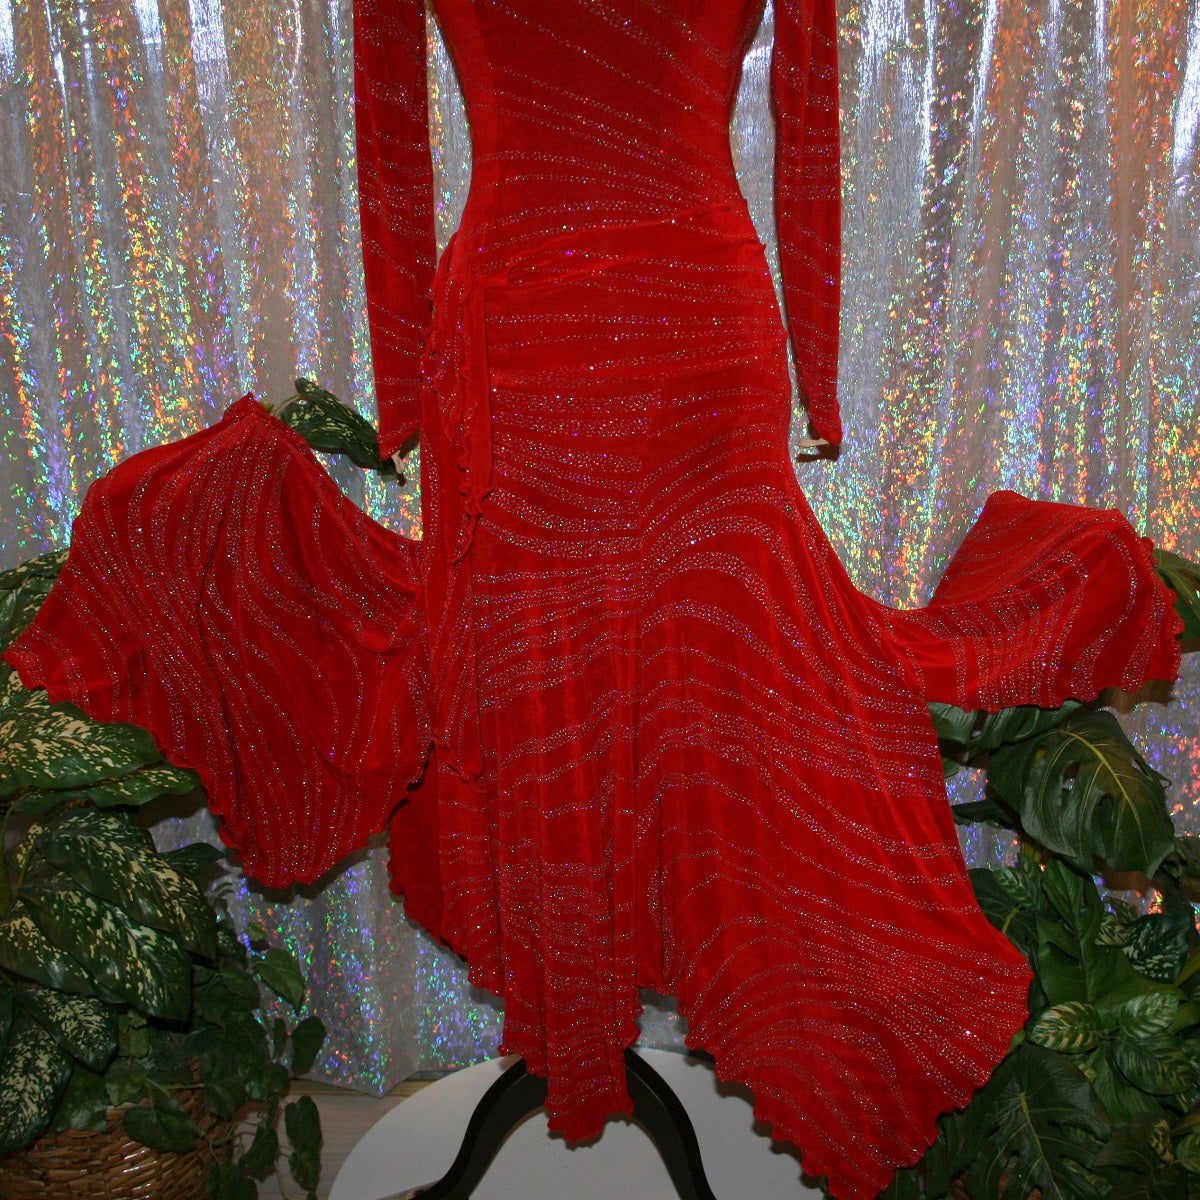 bottom view with smooth waltz skirt of Red 3 piece ballroom converta dress consisting of a long sleeve red bodysuit, Latin-rhythm skirt with hand beading, smooth waltz length skirt plus neck piece with hand beading created out of  deep red glitter slinky with a gorgeous wave pattern.